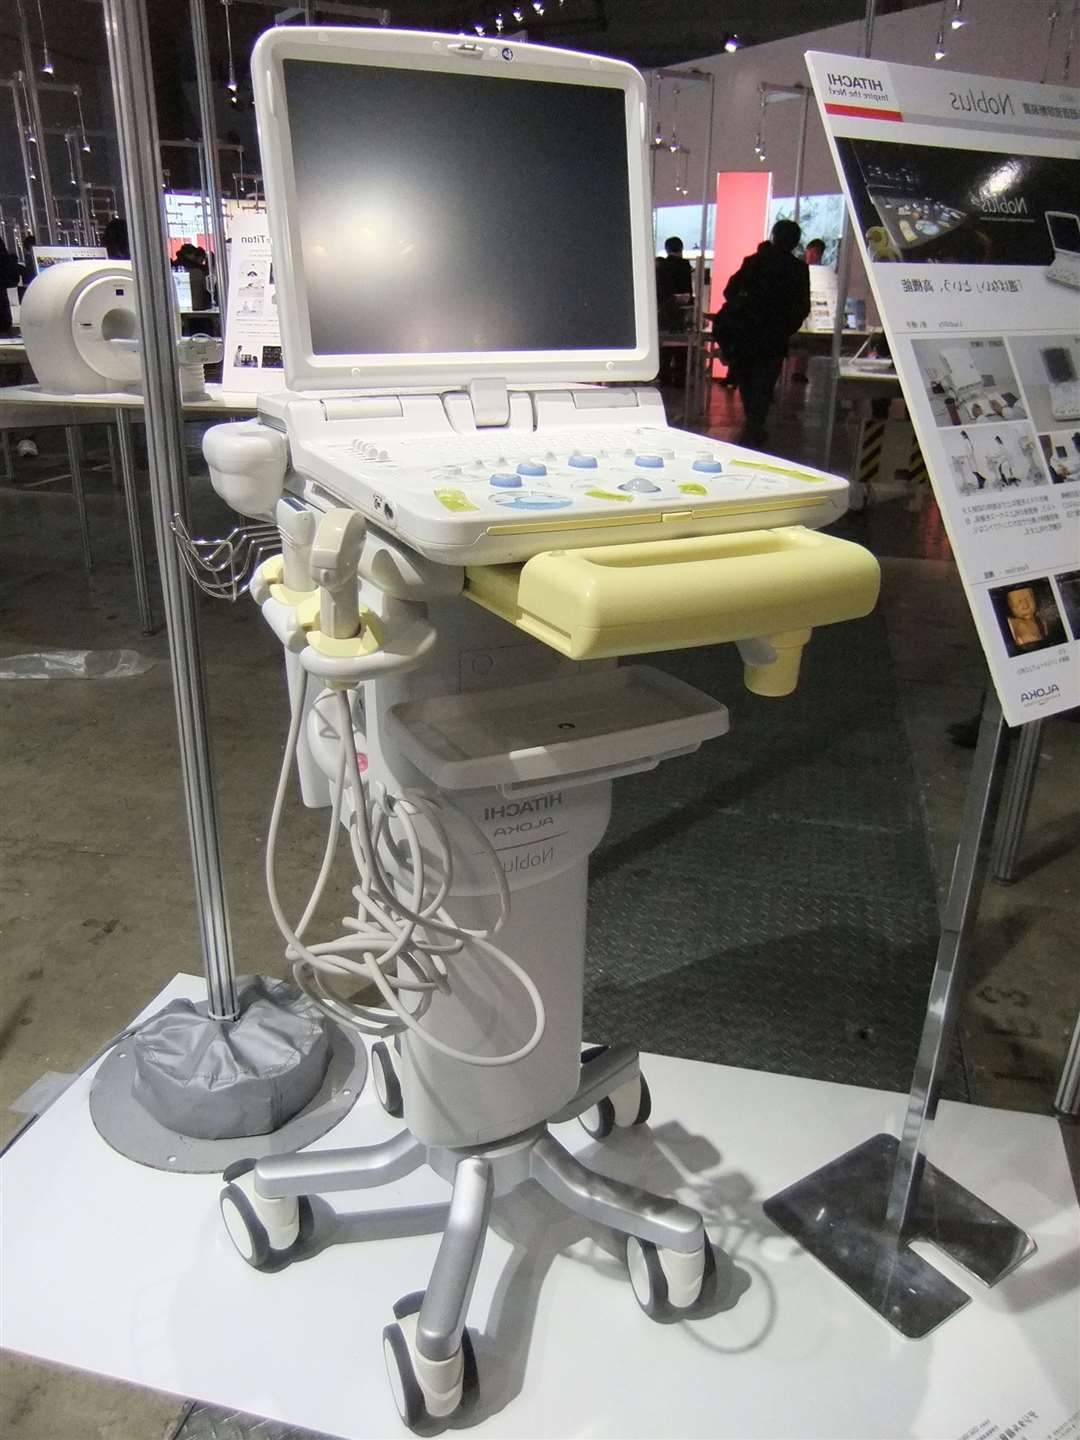 An ultrasound scanner. Picture: Mj-bird, CC BY-SA 3.0 <https://creativecommons.org/licenses/by-sa/3.0>, via Wikimedia Commons.